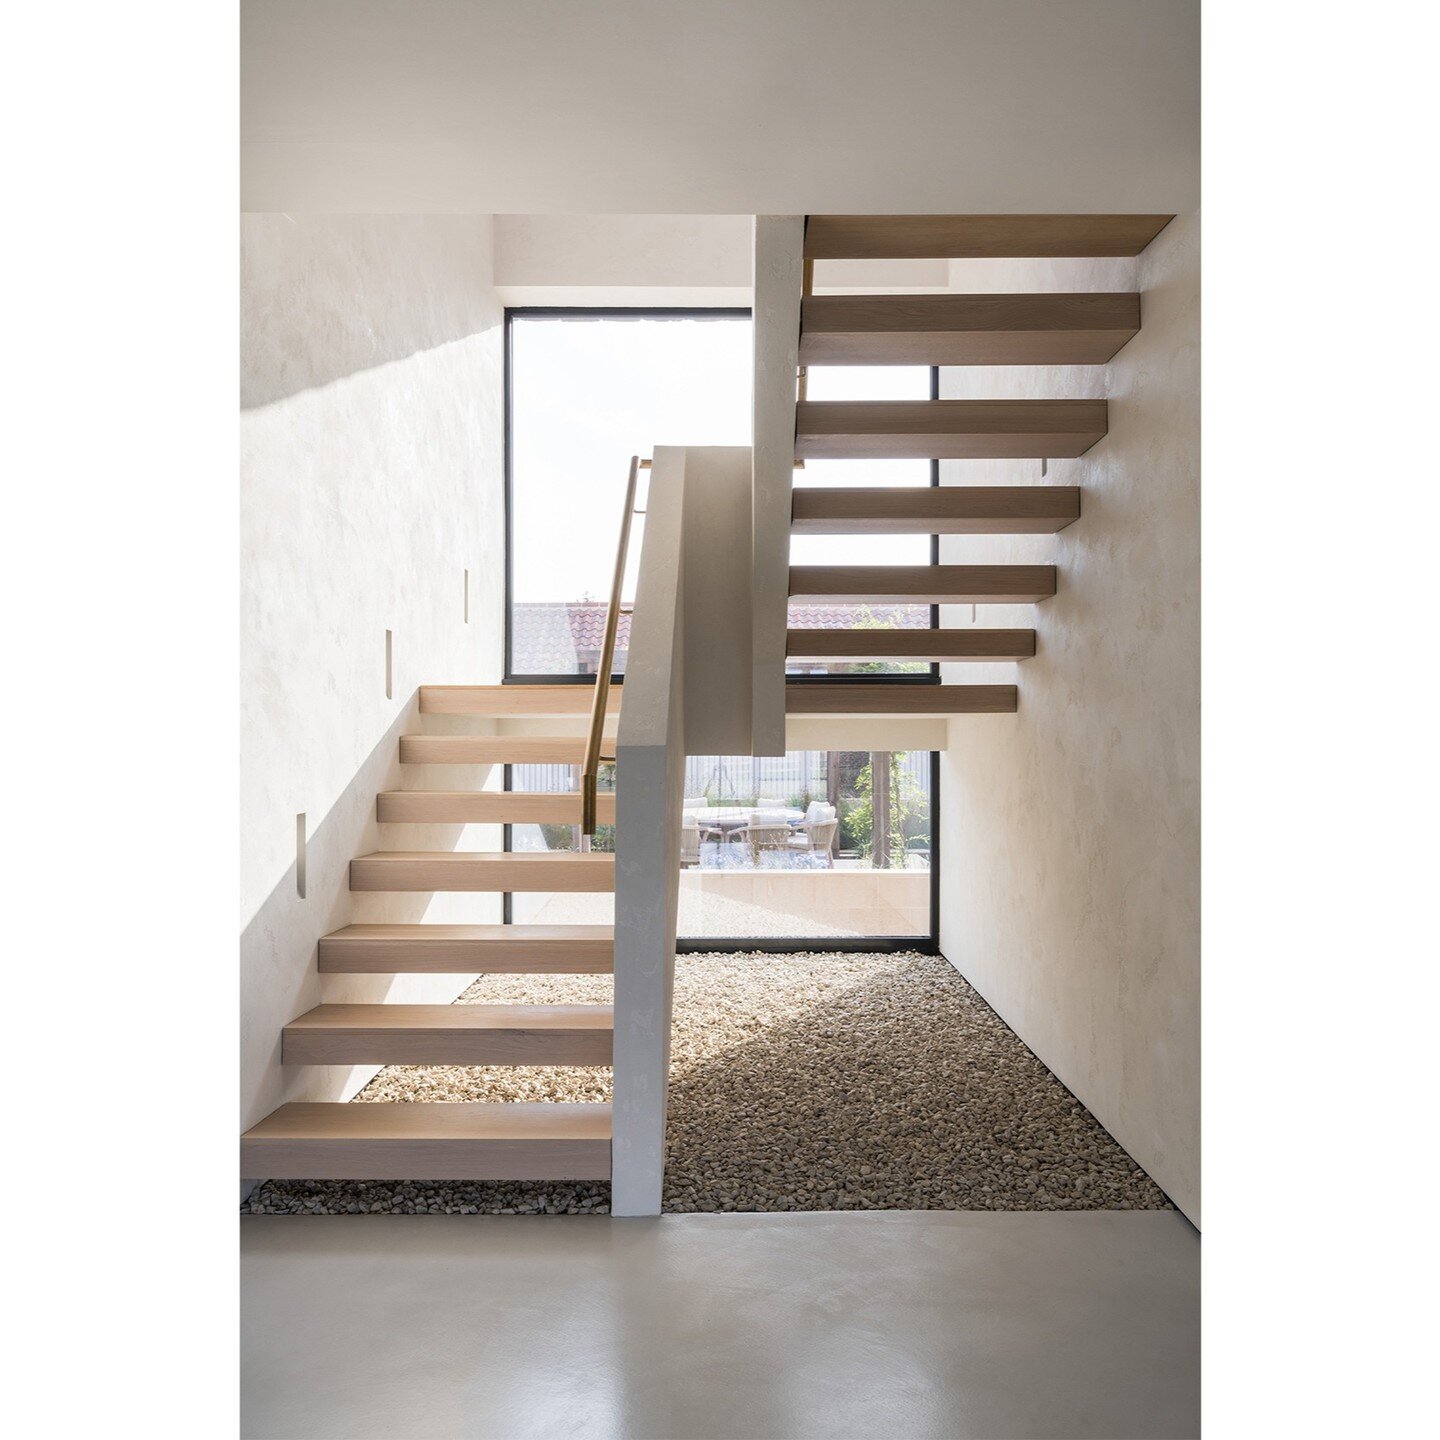 Separated from the families private space and adjacent to the indoor pool this staircase and guest bedrooms were created within the envelope of a derelict stable block_The Yorkshire Farmhouse

Photography: @frenchandtye

Architectural Collaboration: 